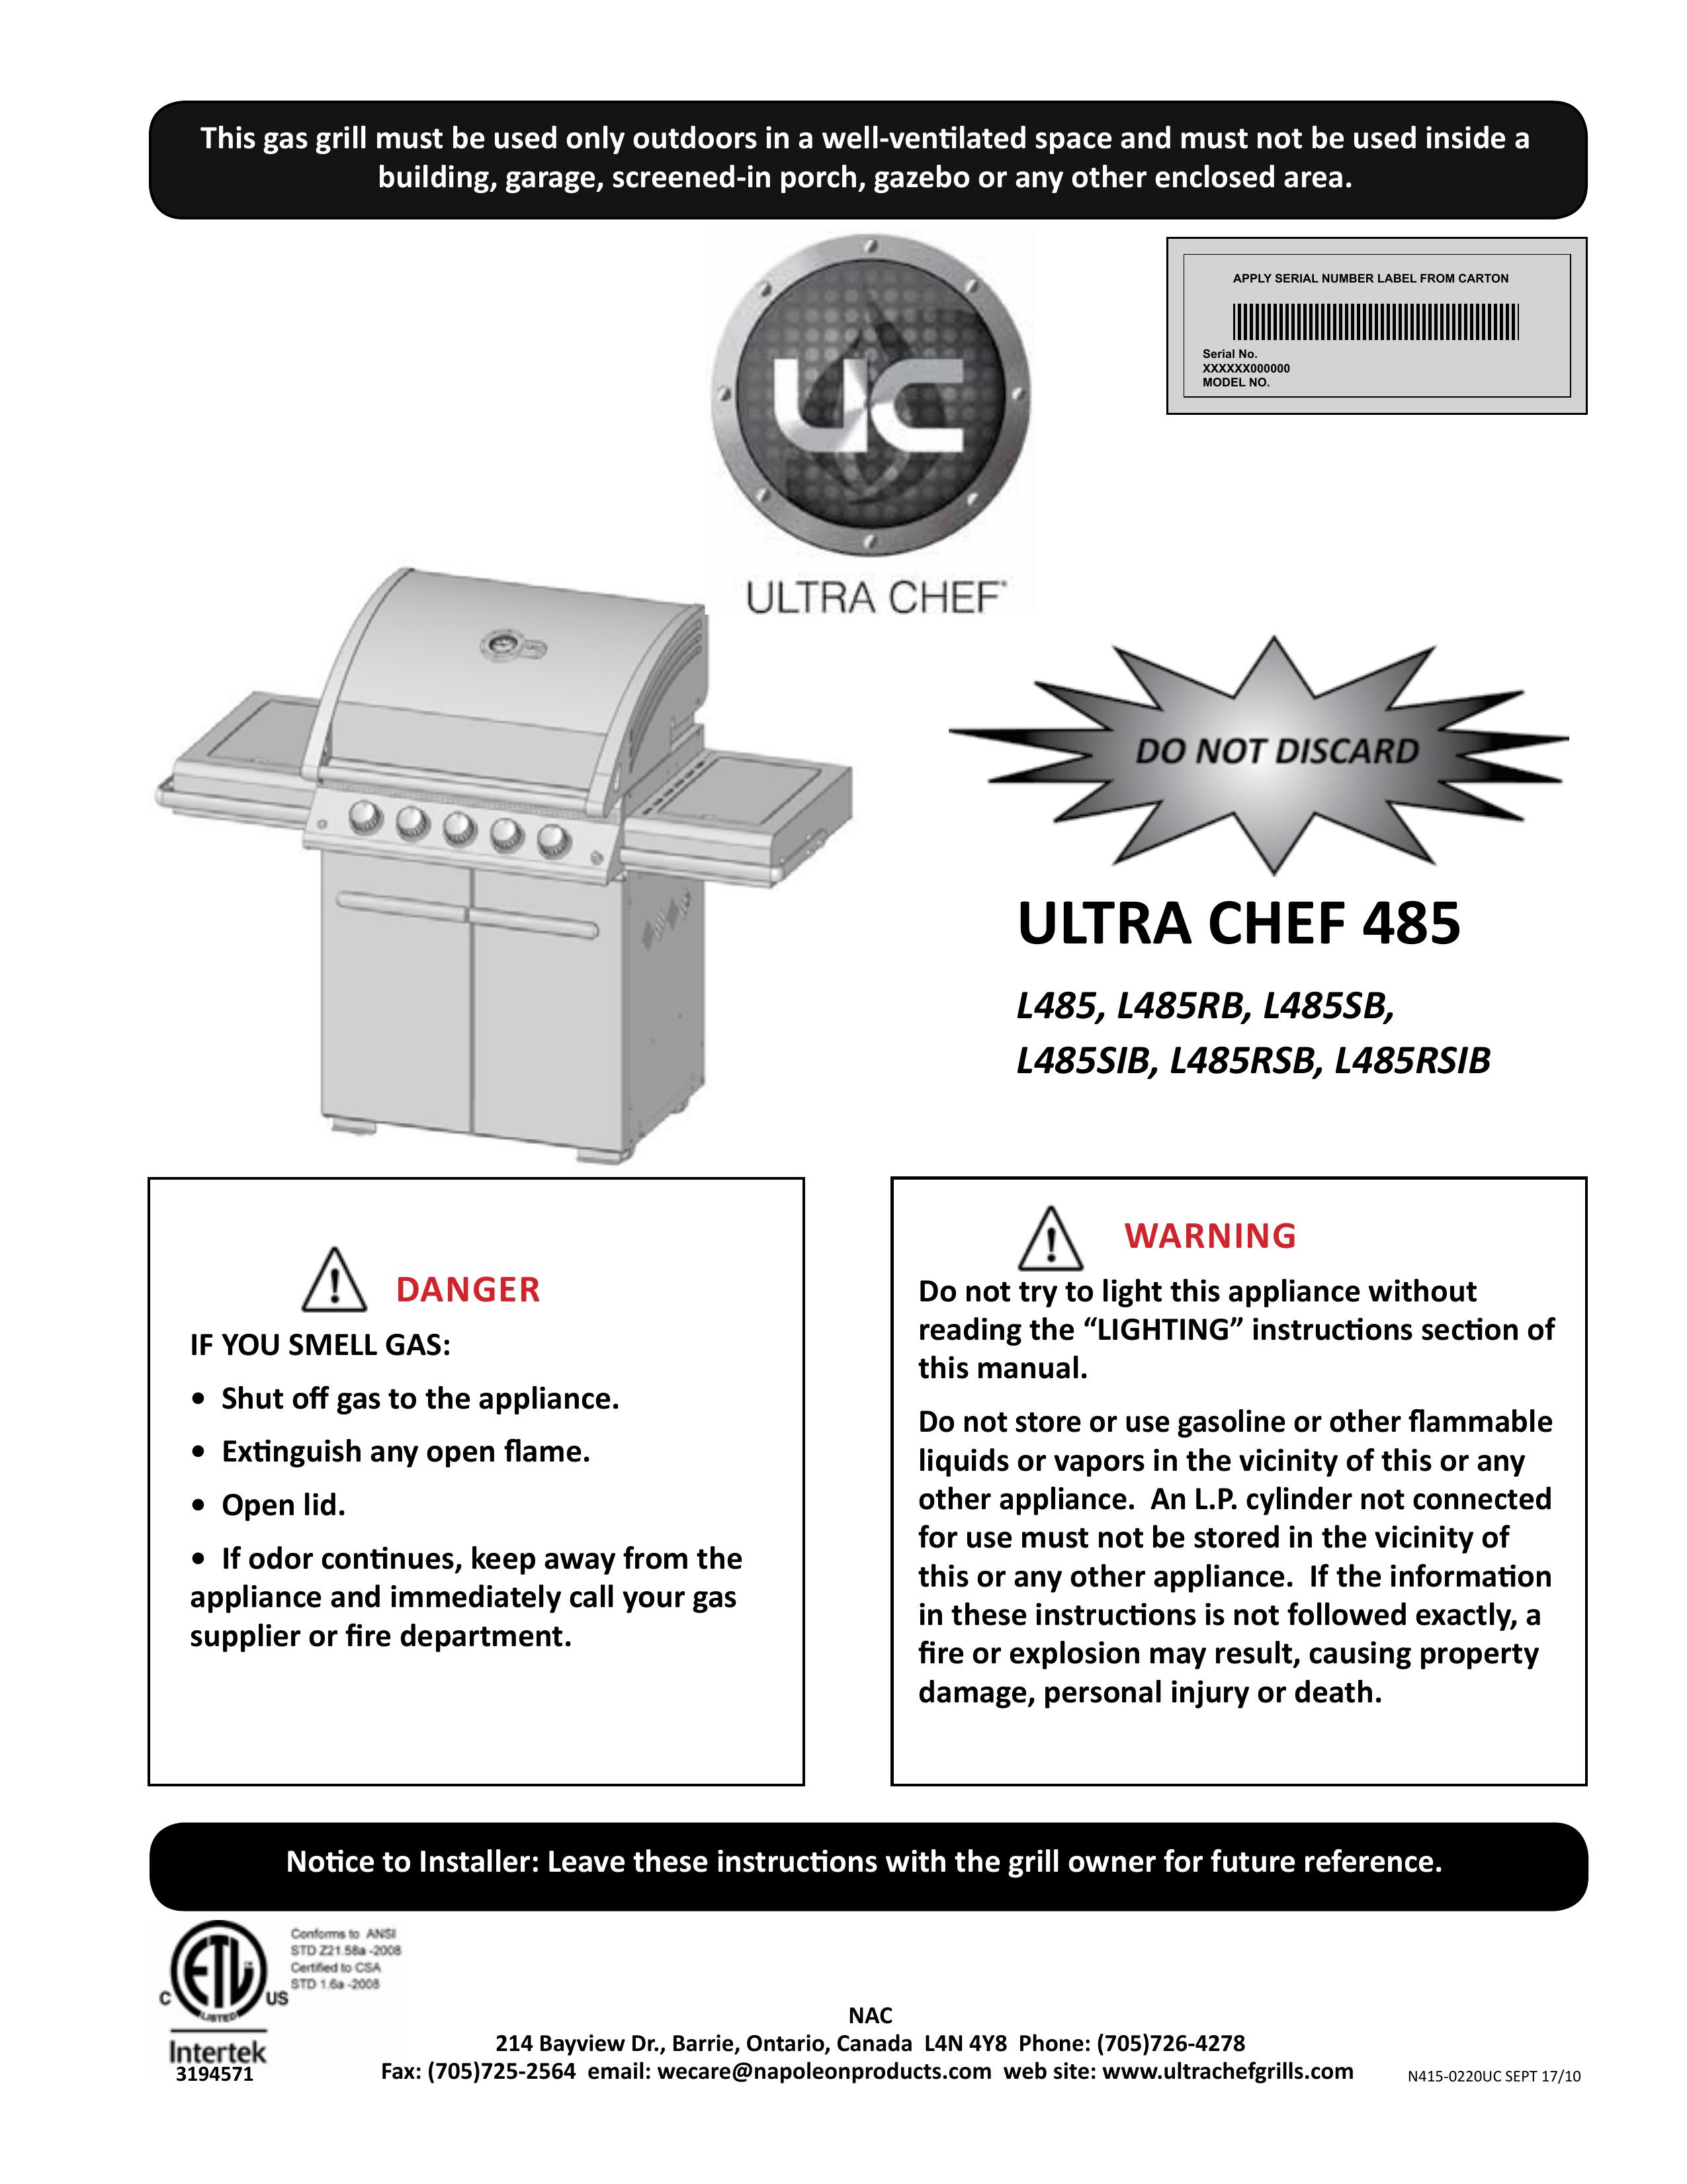 Interlink electronic L485RSB Gas Grill User Manual